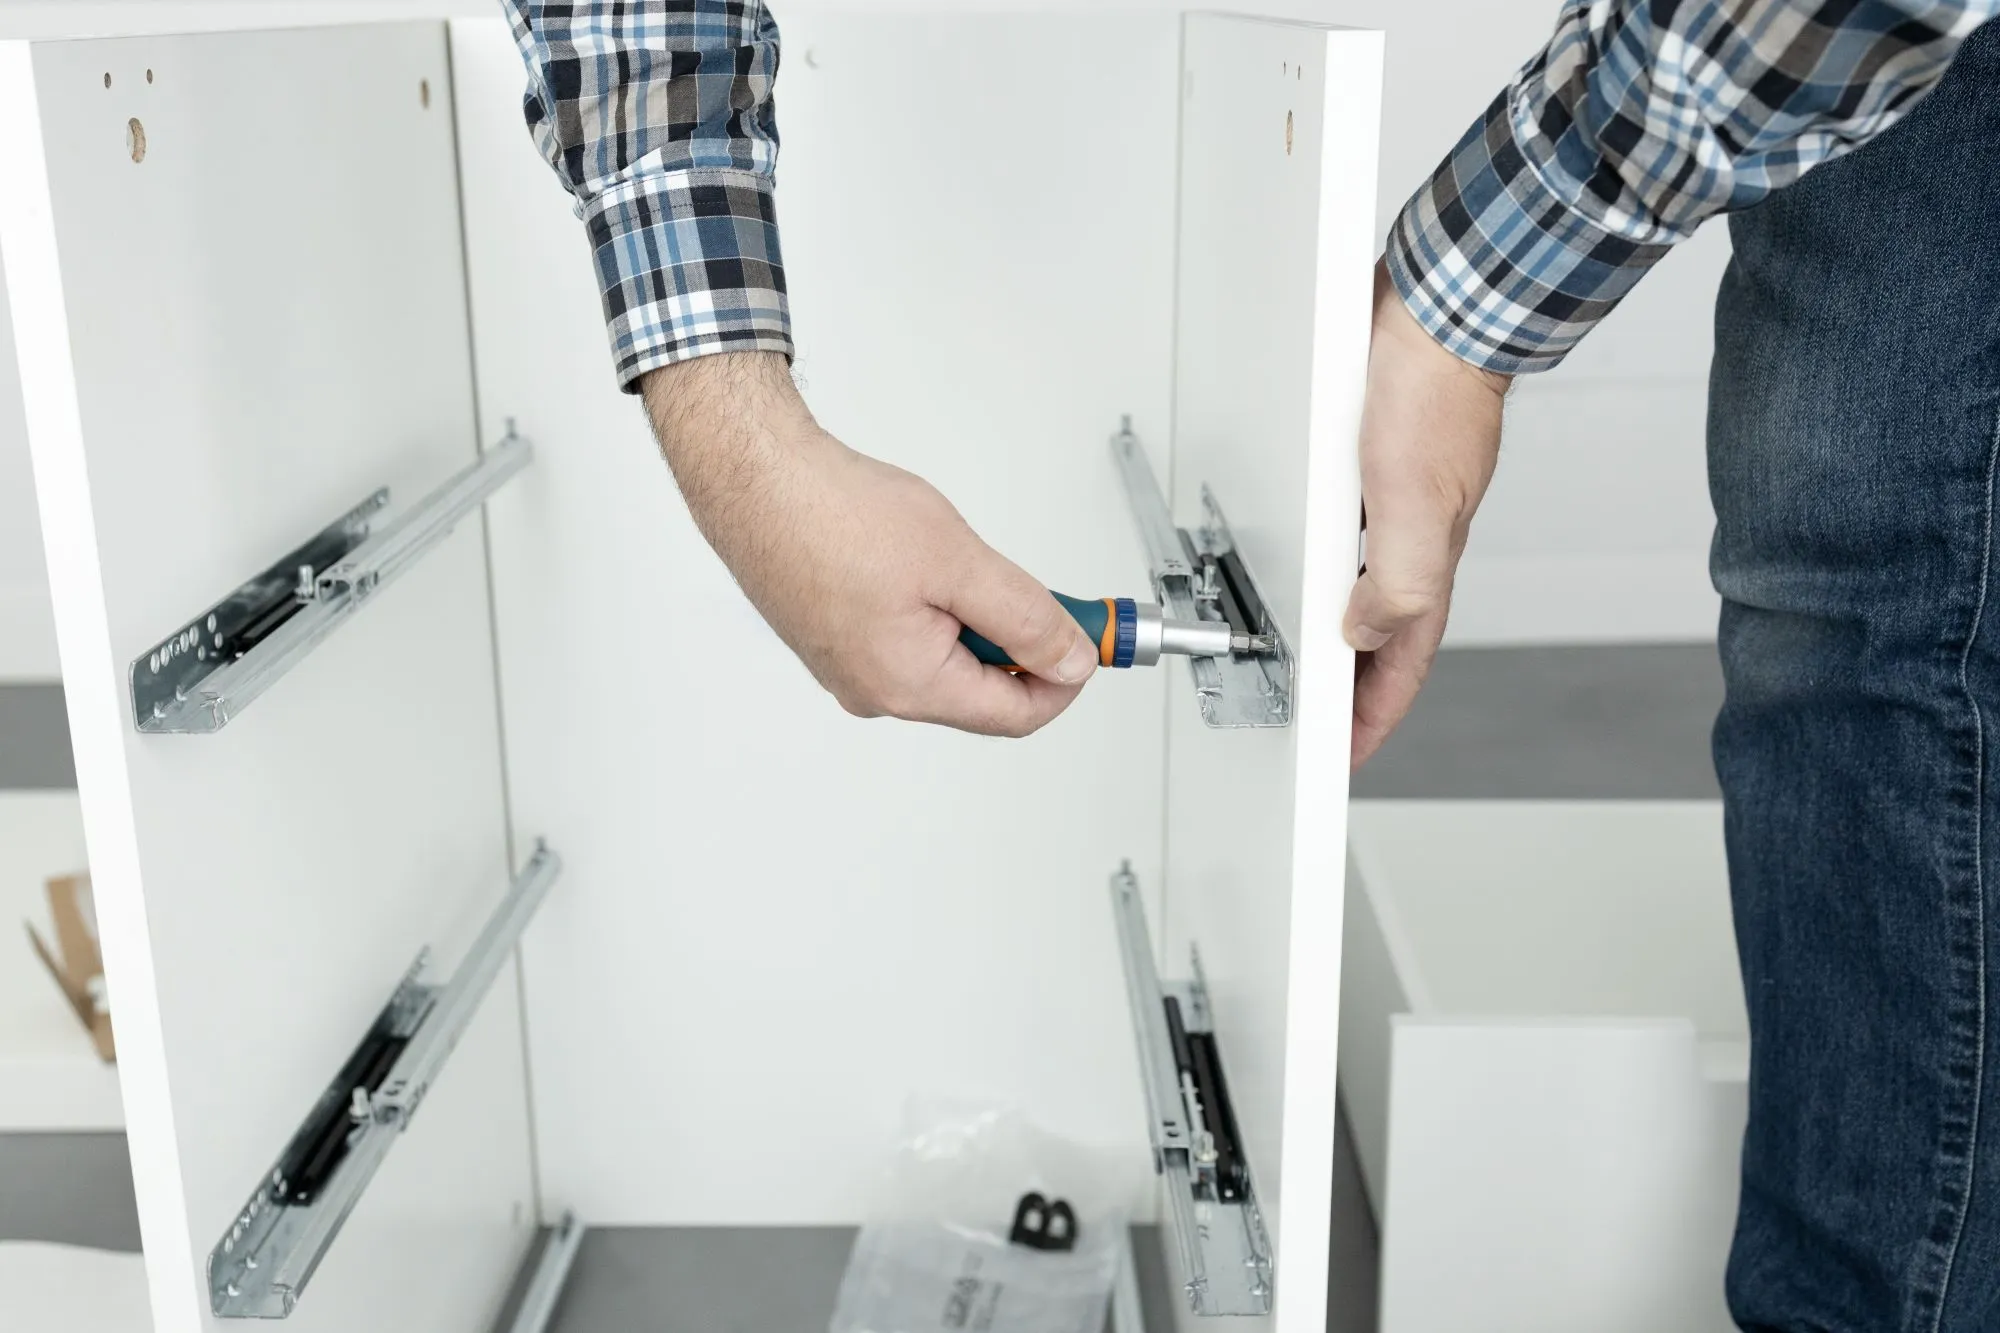 A screwdriver is an indispensable tool that you simply cannot do without when assembling your ready-to-assemble (RTA) cabinets.